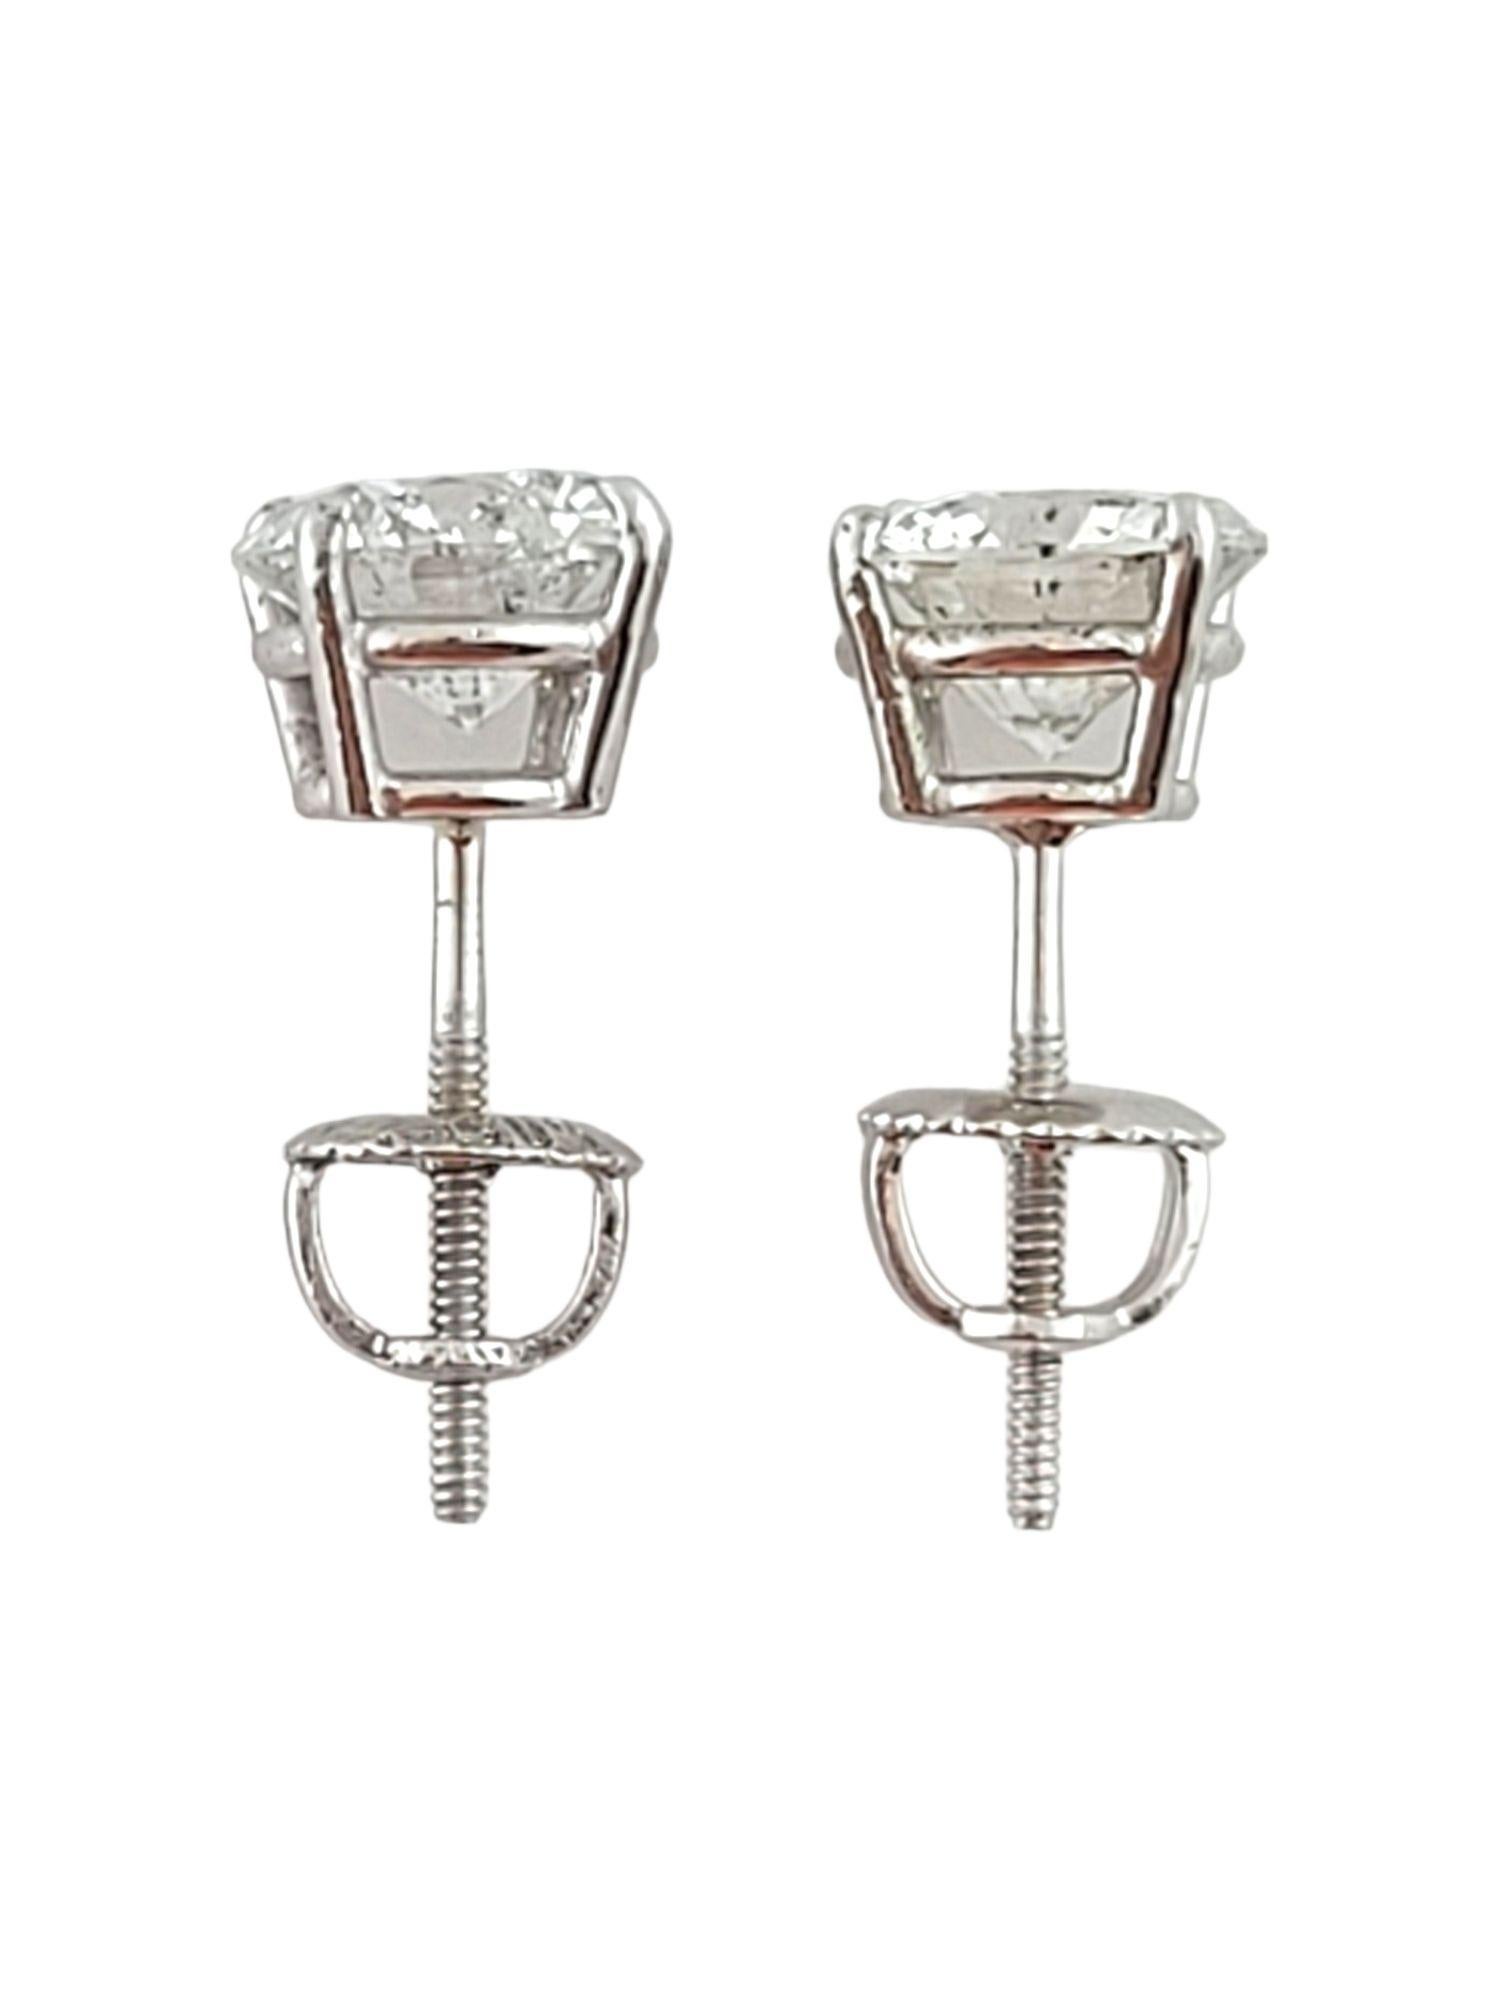 14K White Gold Diamond Stud Earrings #14850 In Good Condition For Sale In Washington Depot, CT